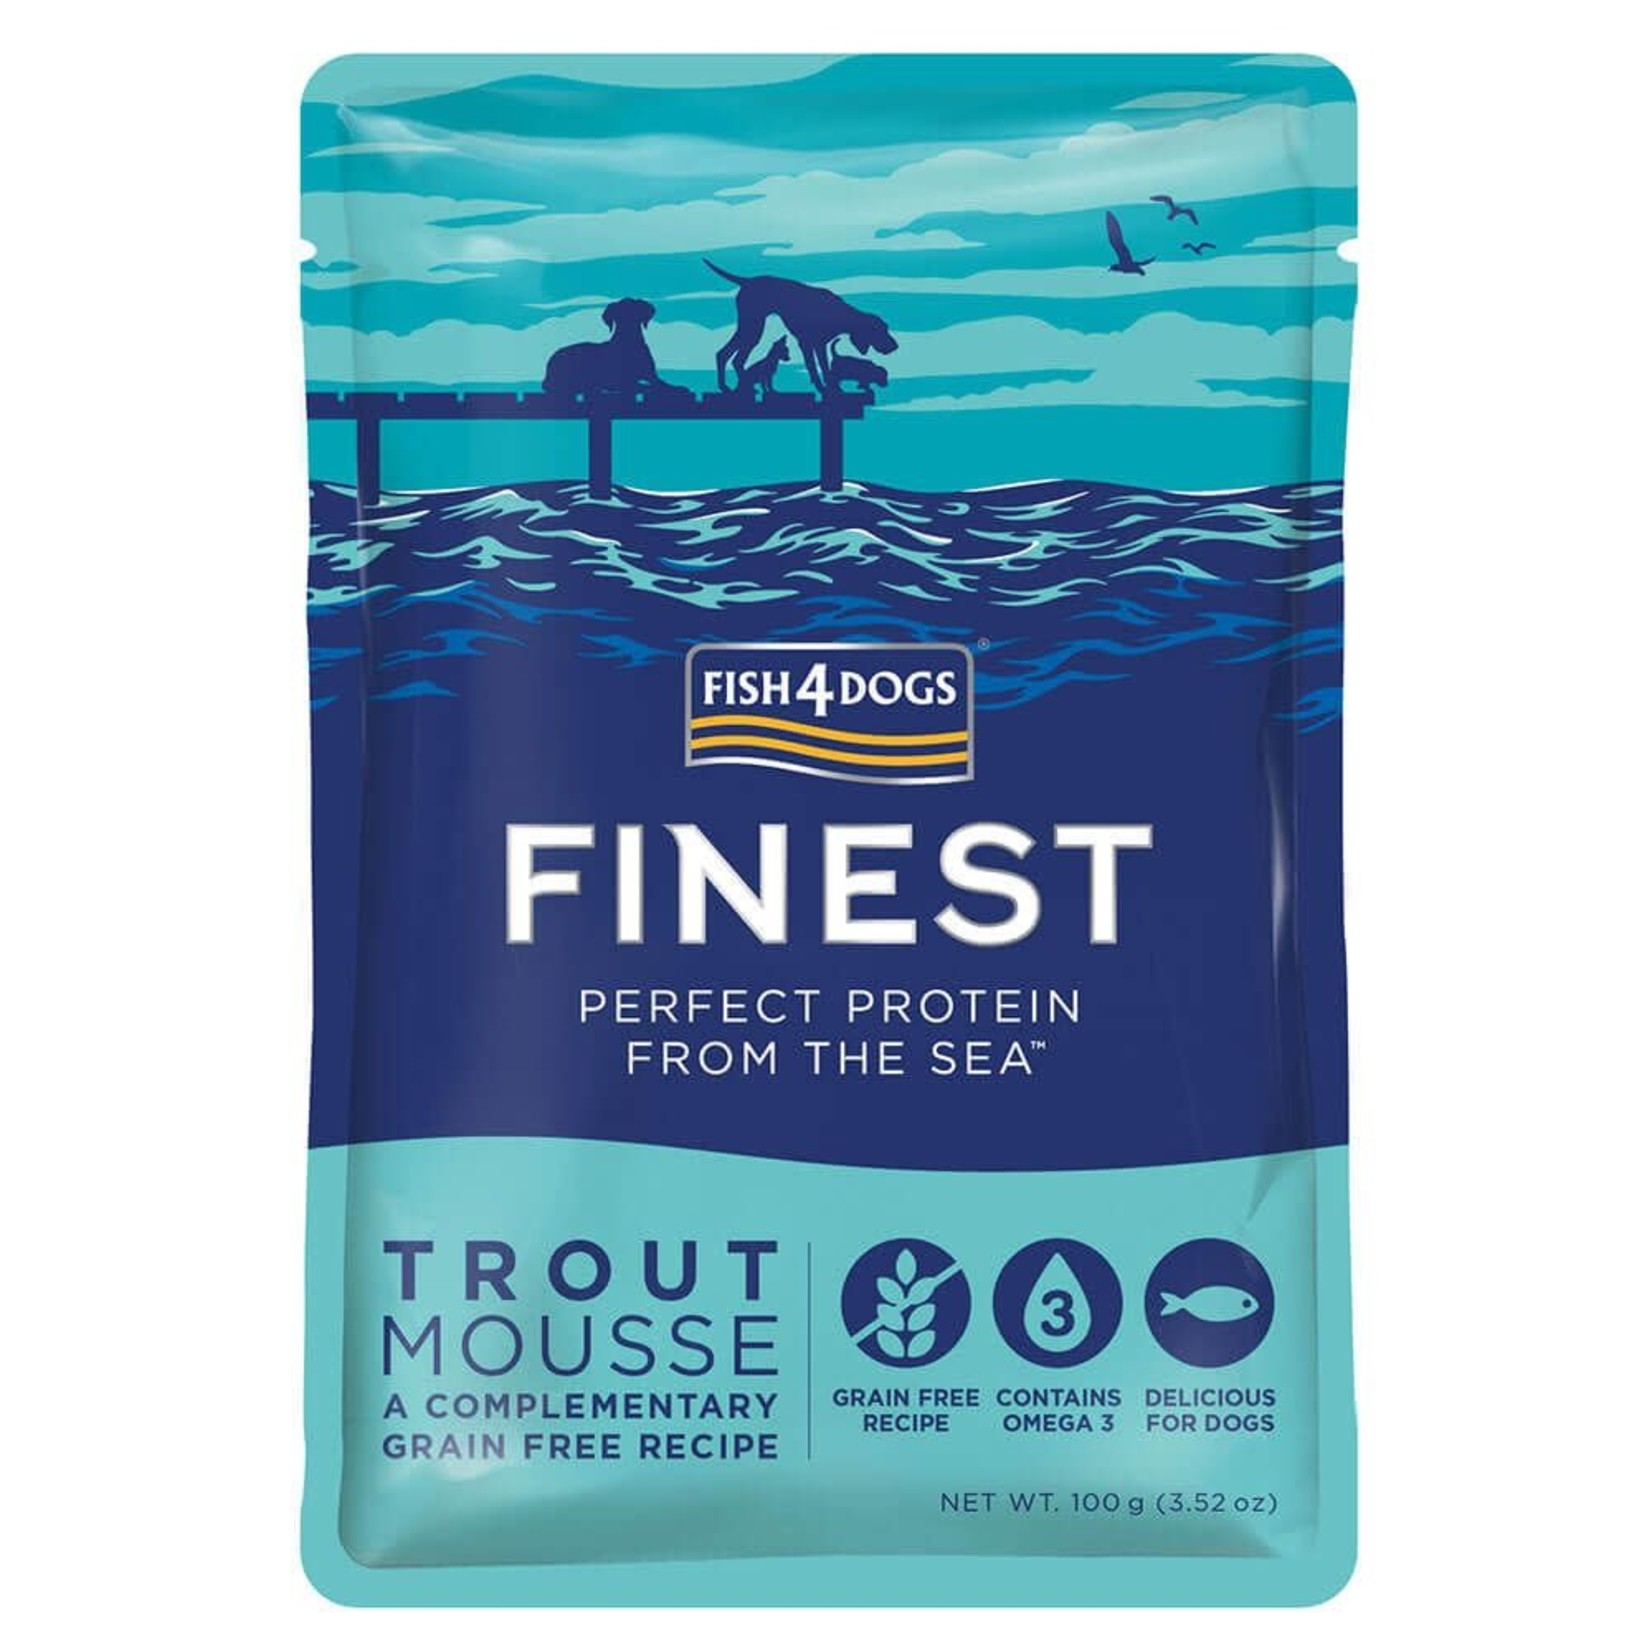 Fish4Dogs Finest Wet Dog Food Trout Mousse, 100g pouch